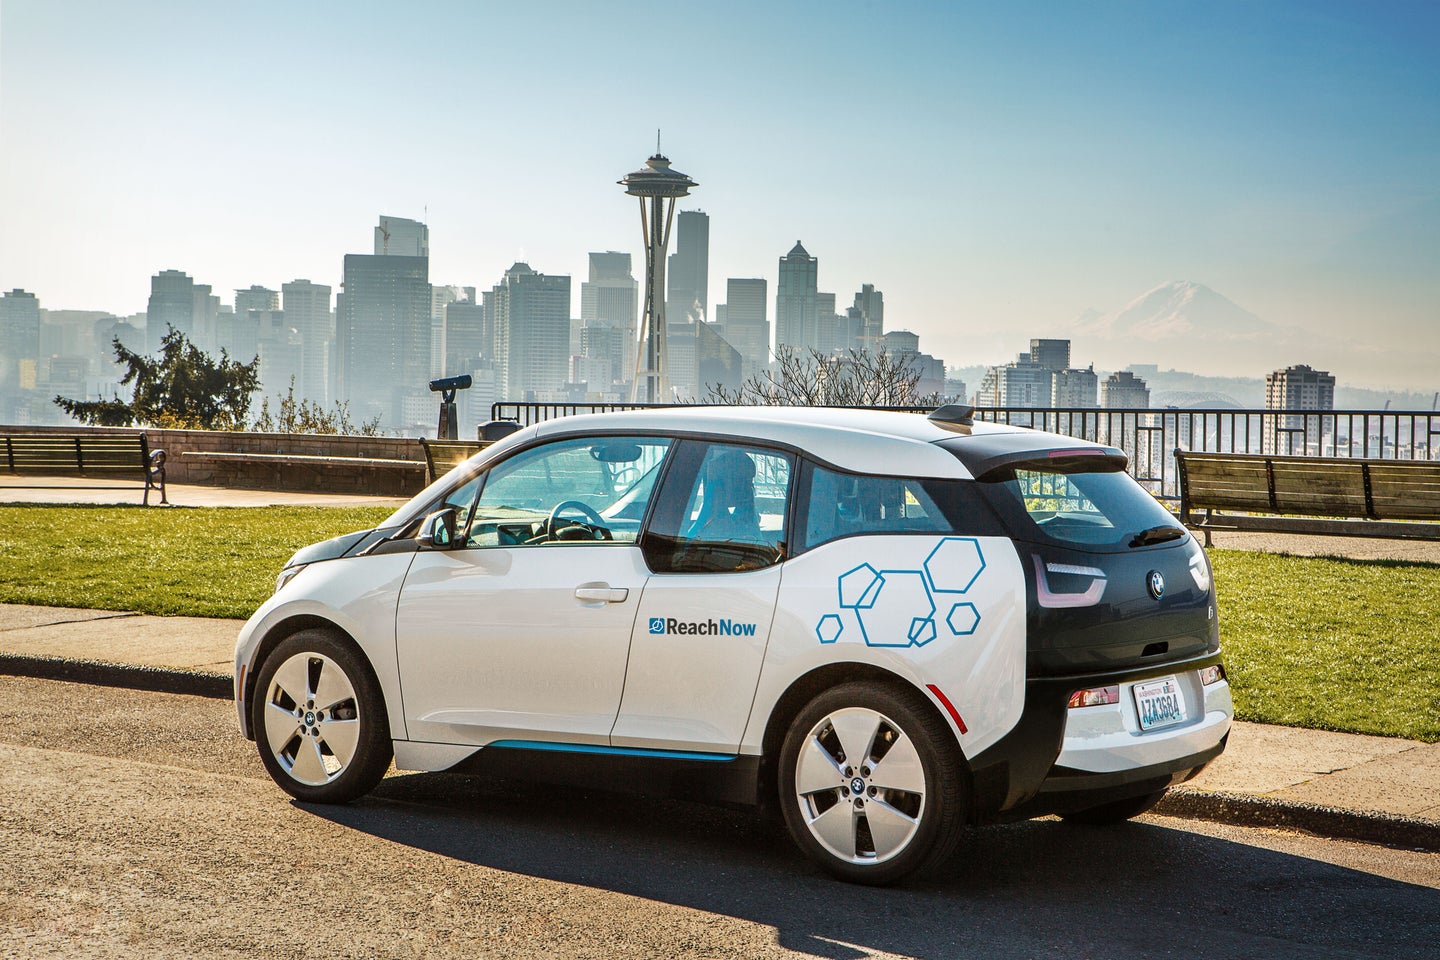 Seattle to Become Testing Grounds for BMW ReachNow’s Autonomous Cars